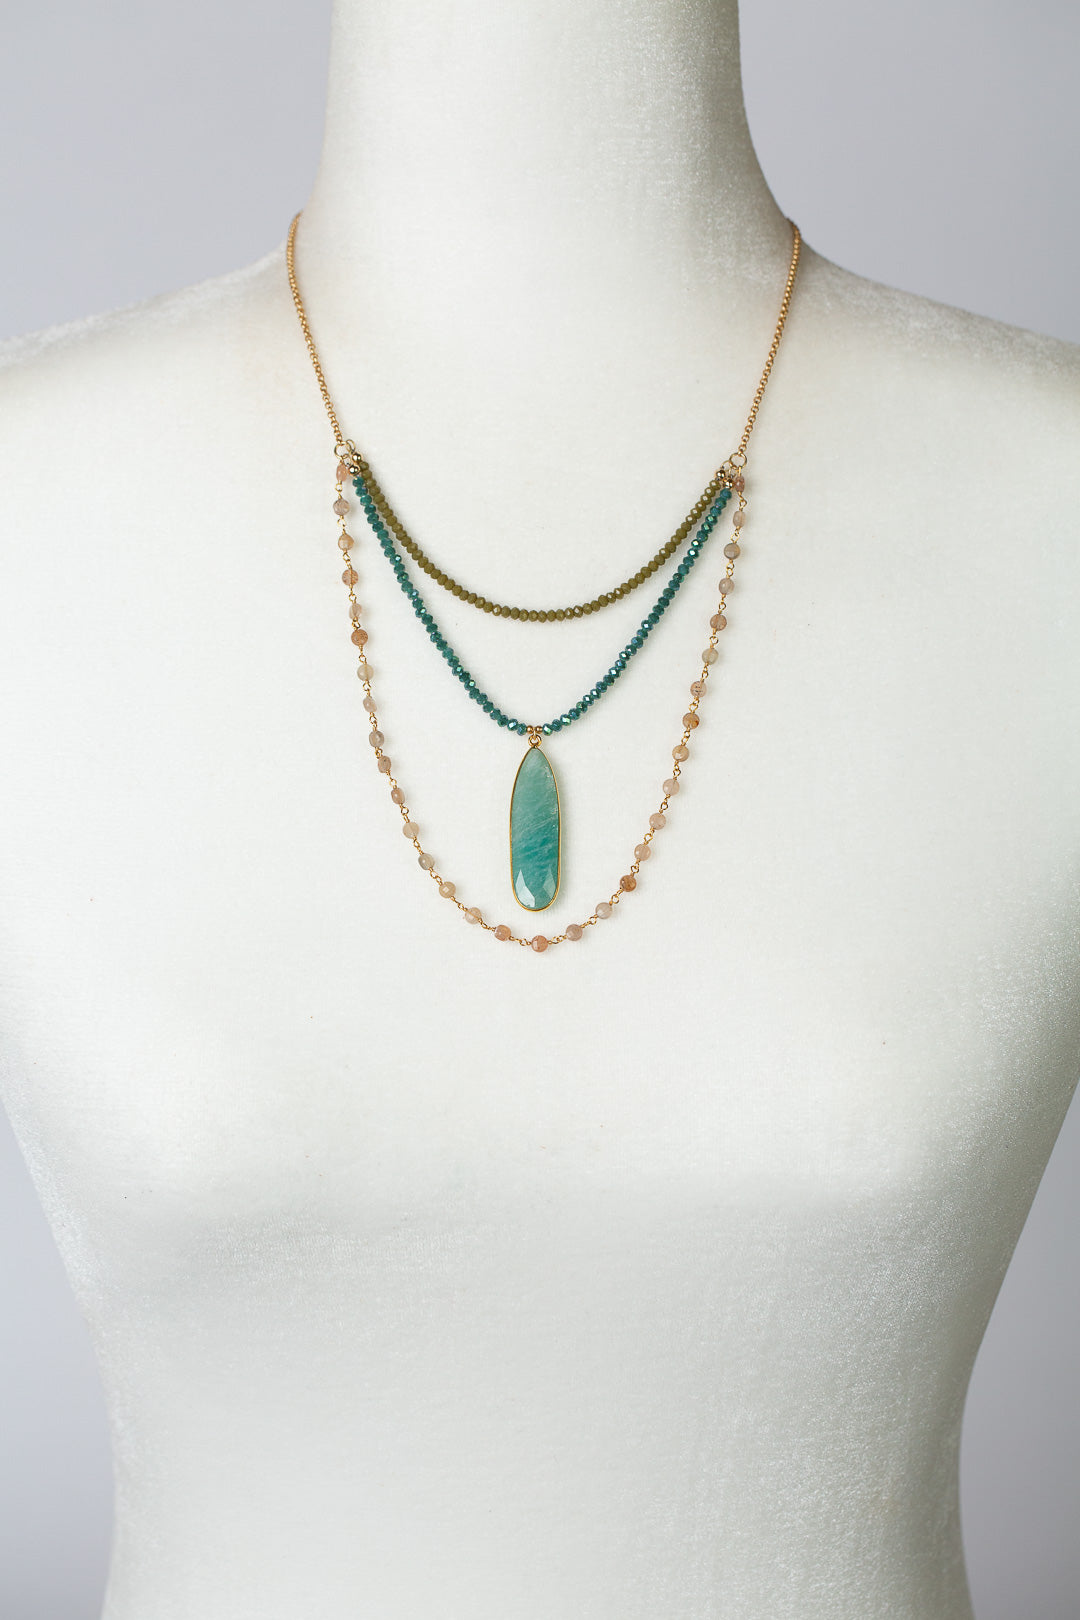 Waterfall 19-21" Moonstone, Crystal with Amazonite Multistrand Necklace